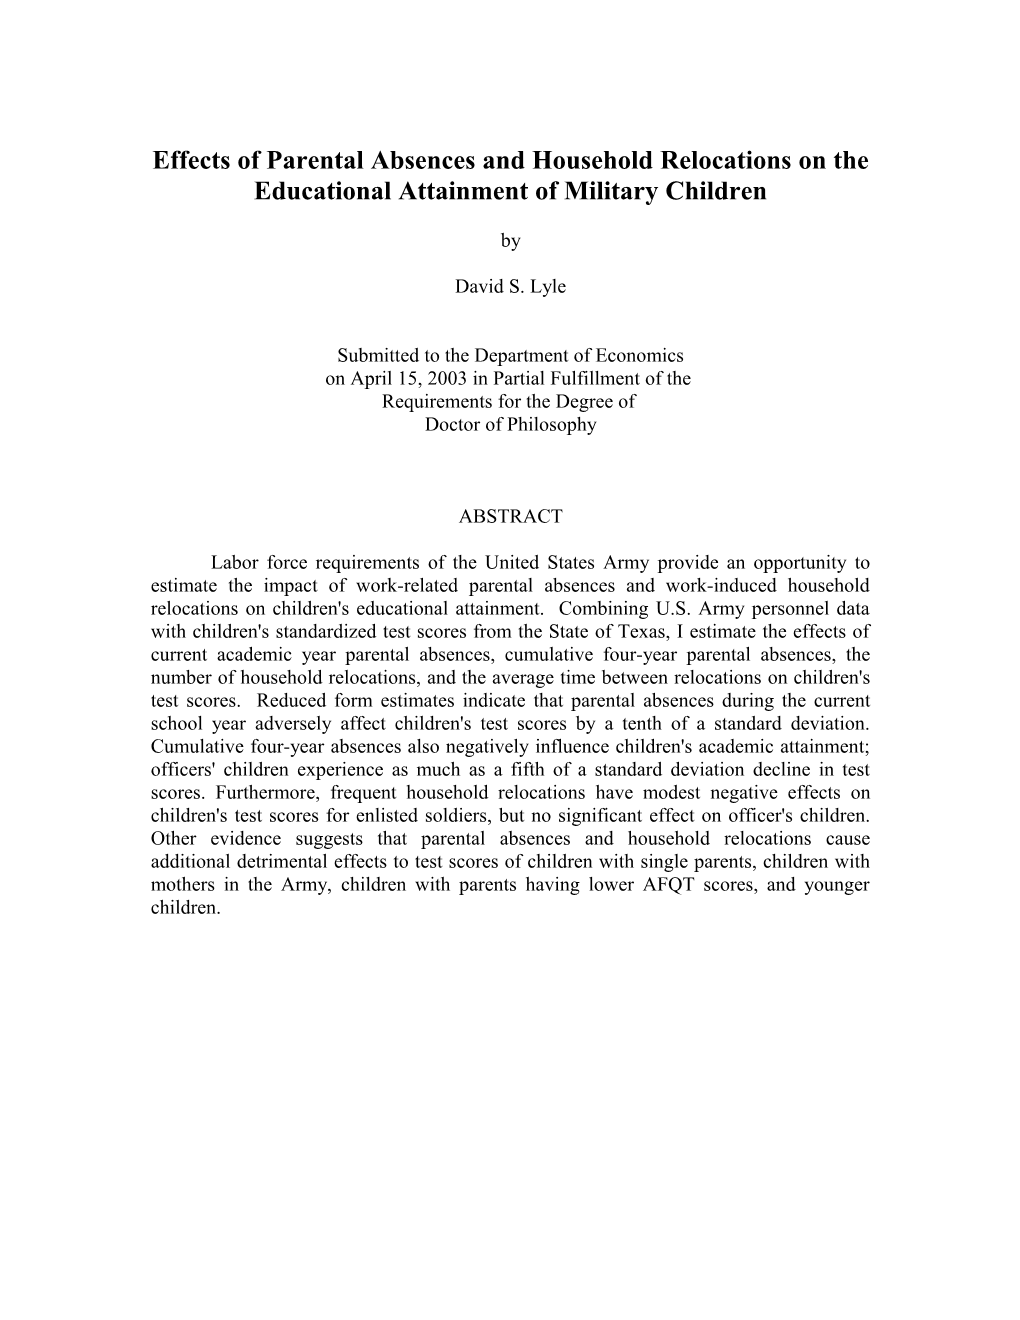 Parental Absences, Relocation, and Children's Education: Evidence from the U